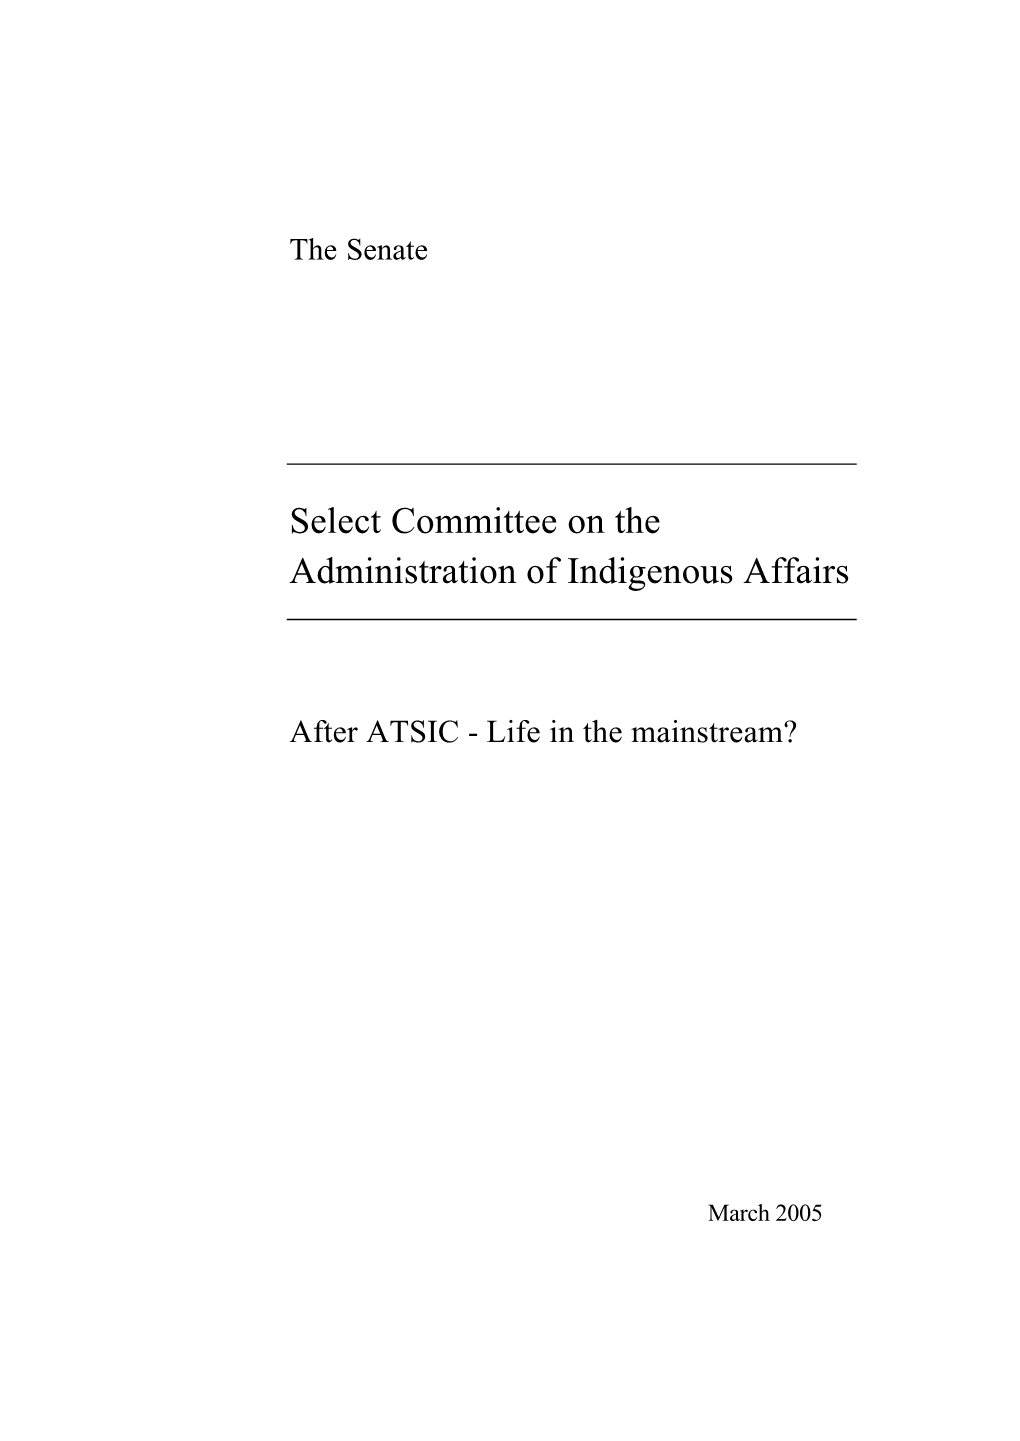 Select Committee on the Administration of Indigenous Affairs